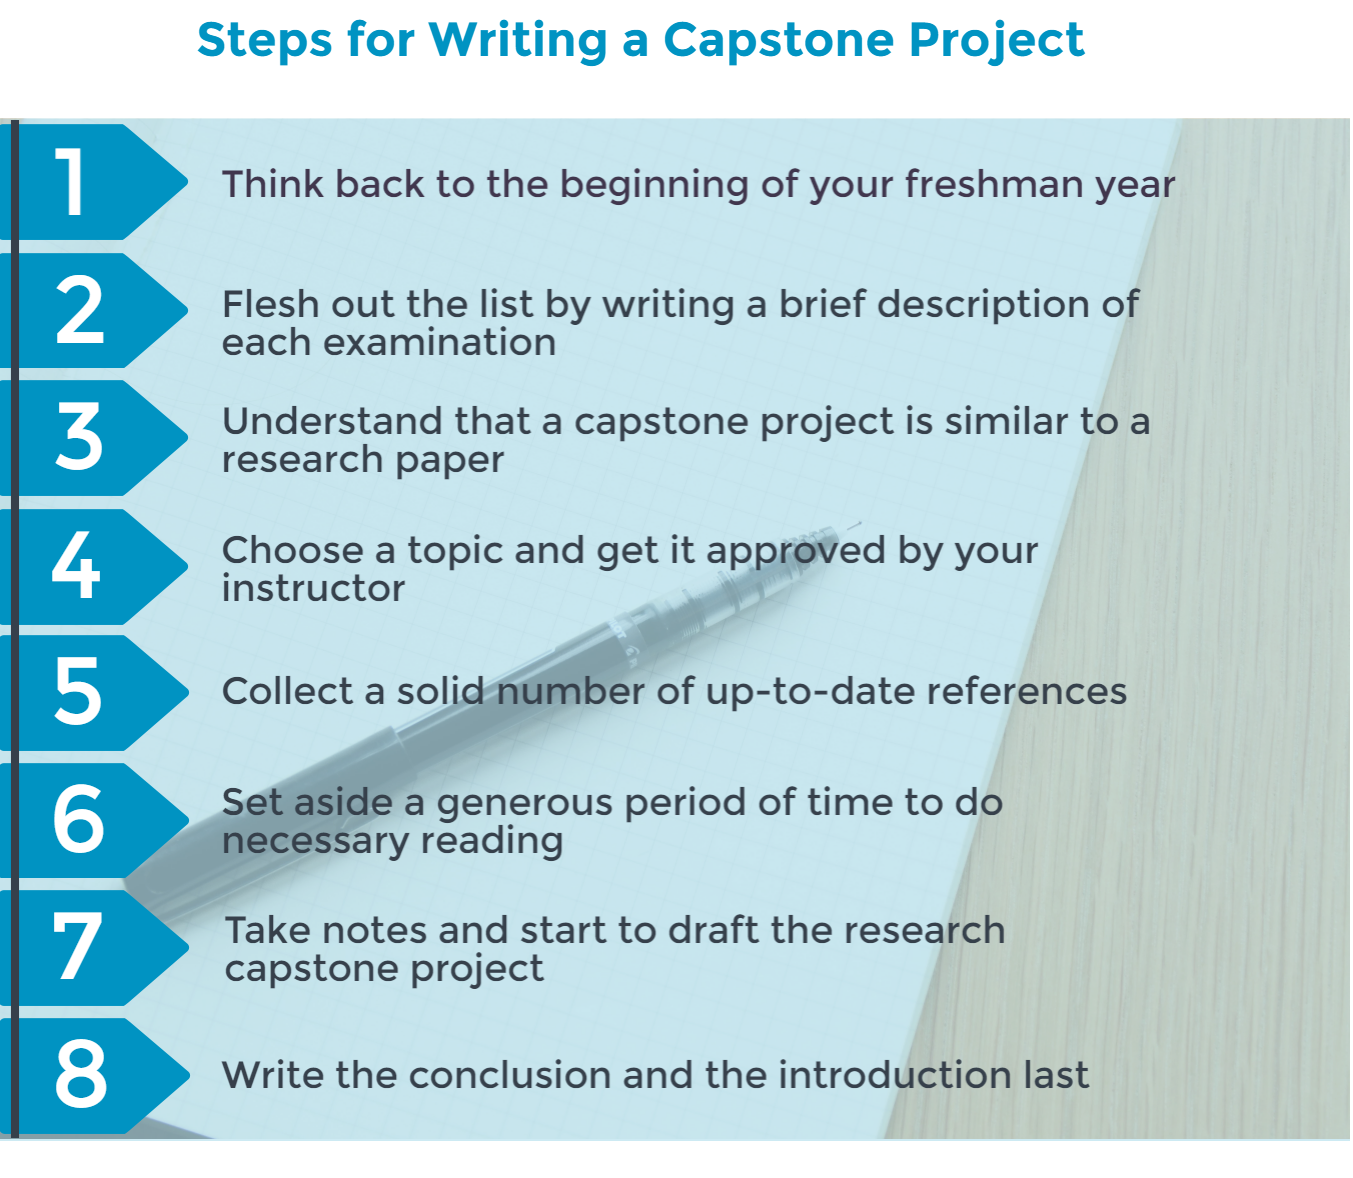 A guide for writing the capstone project